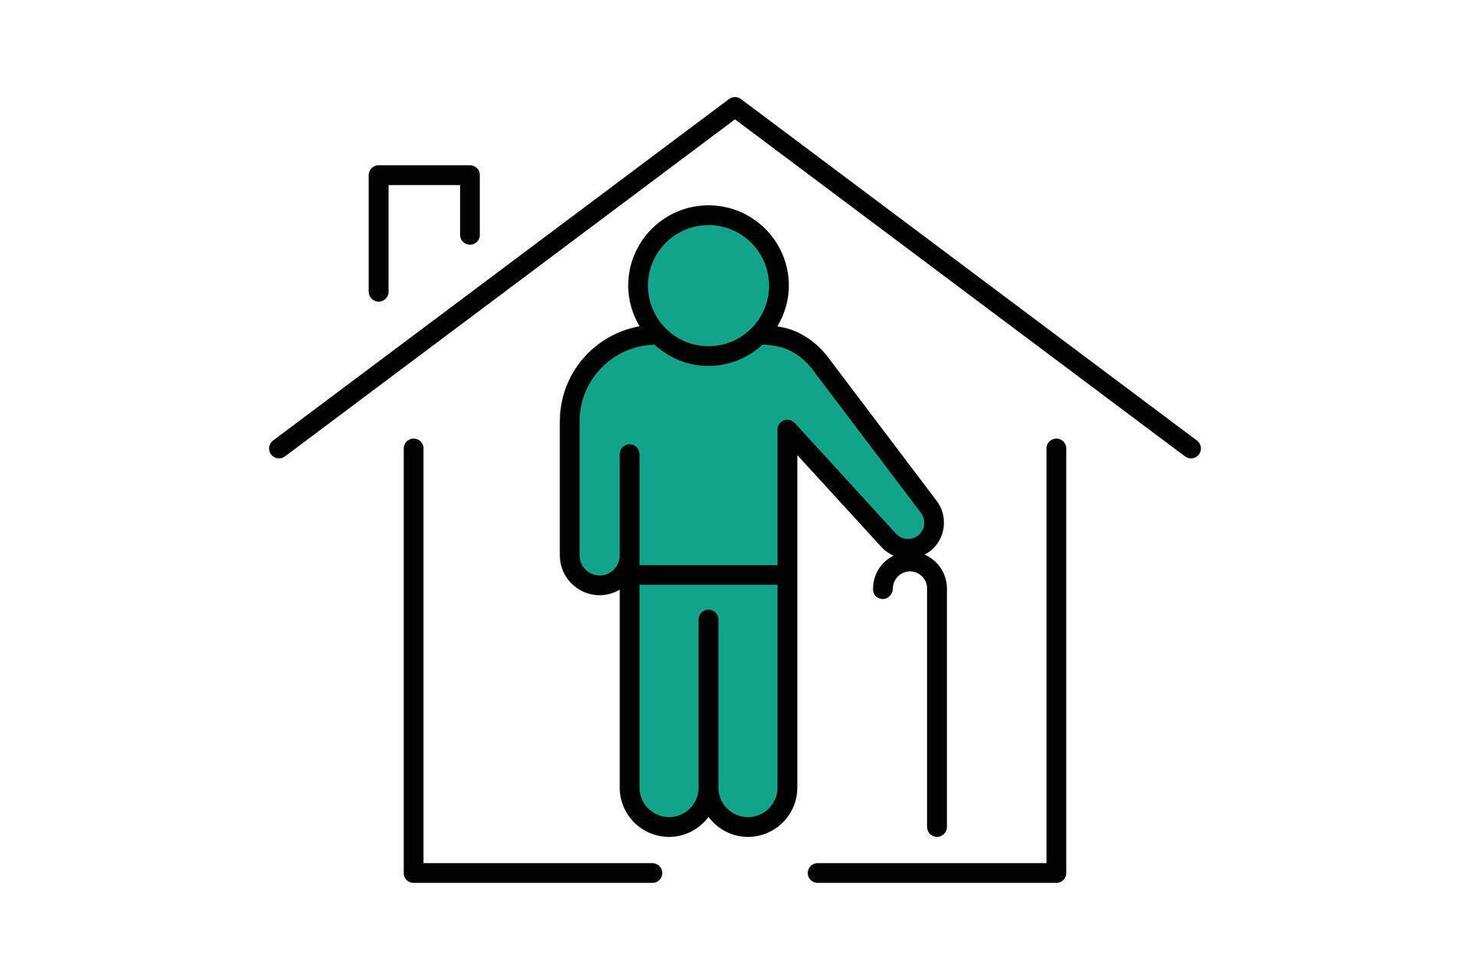 retirement icon. house with elderly. icon related to elderly. flat line icon style. old age element illustration vector